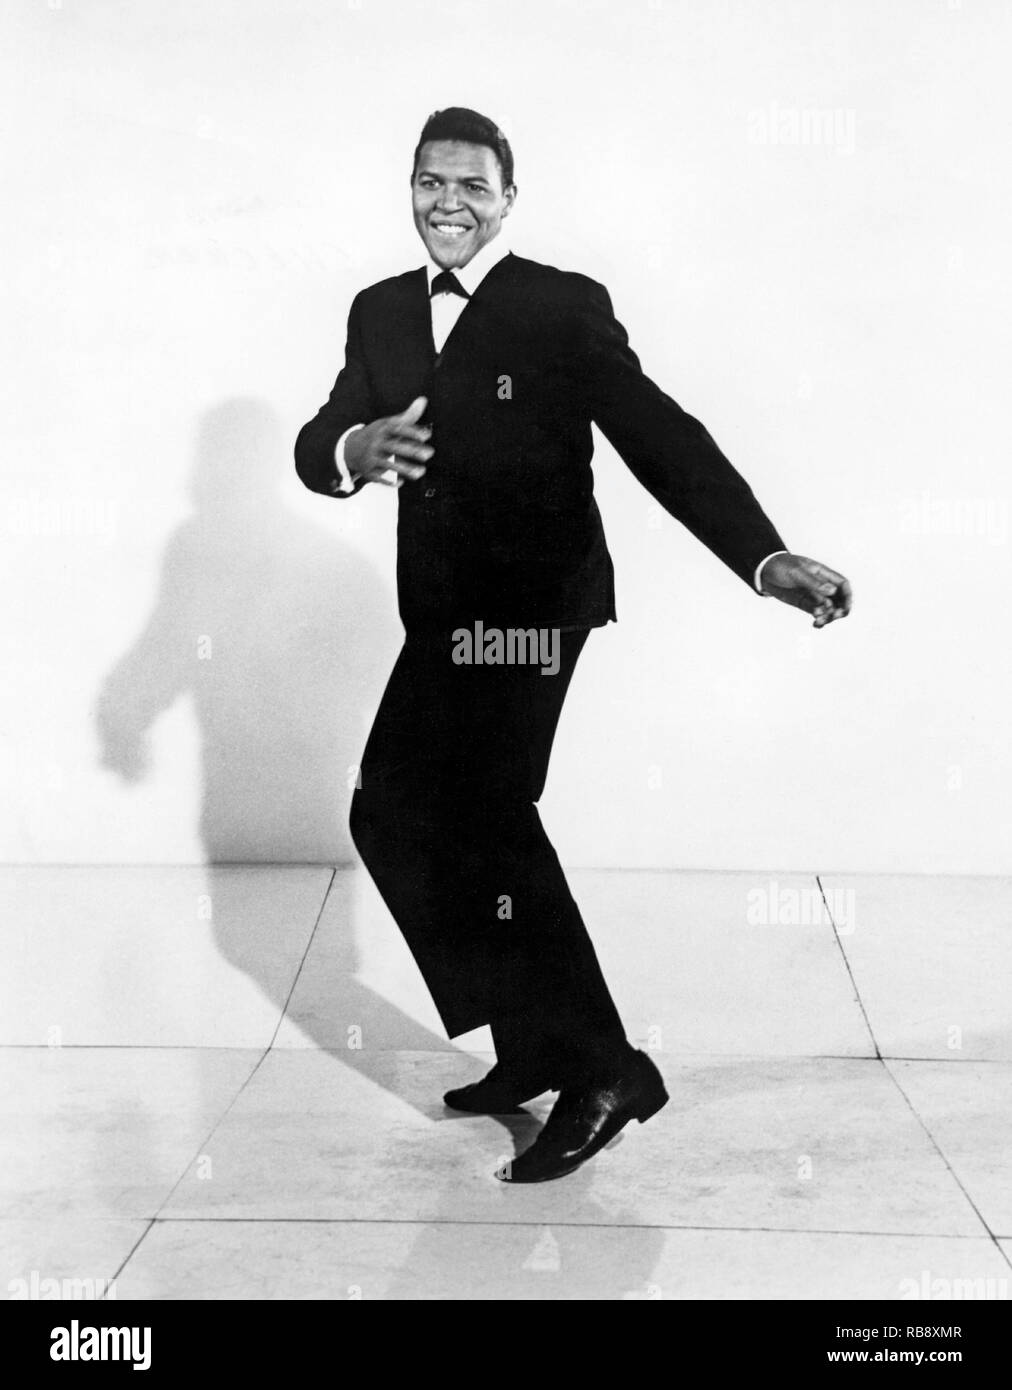 Chubby Checker. Born 1941. American rock 'n roll singer and dancer and is widely known for popularising many dance styles including the twist dance style. 1960s Stock Photo